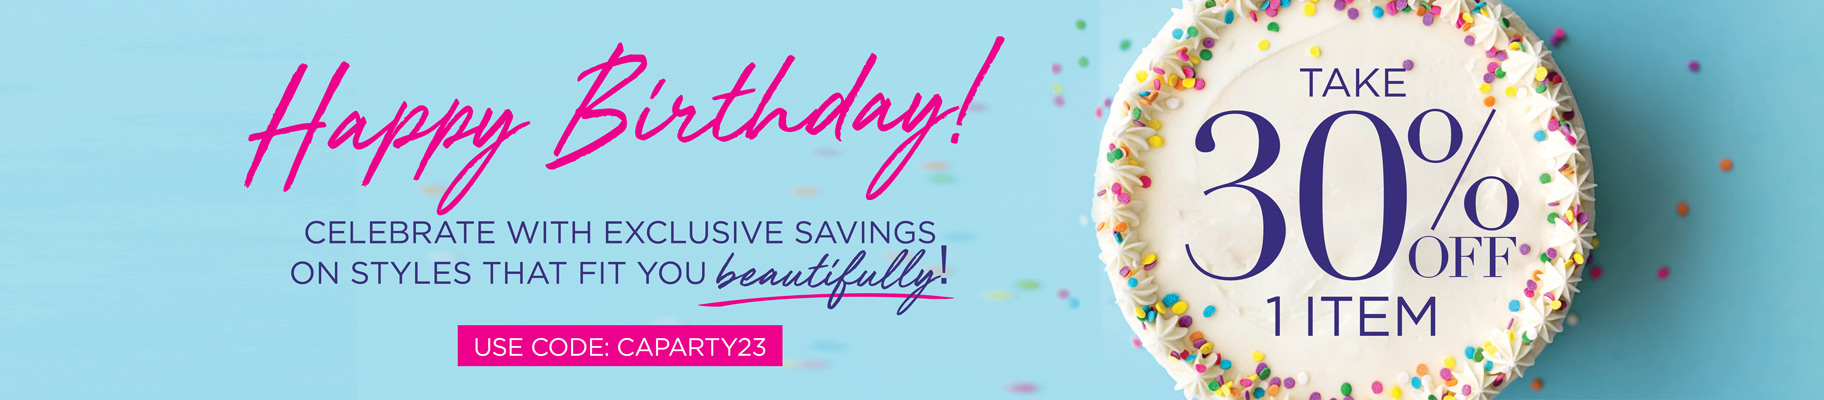 Happy Birthday! Celebrate with exclusive savings on styles that fit you beautifully! Take 30% OFF 1 Item with code: CAPARTY23